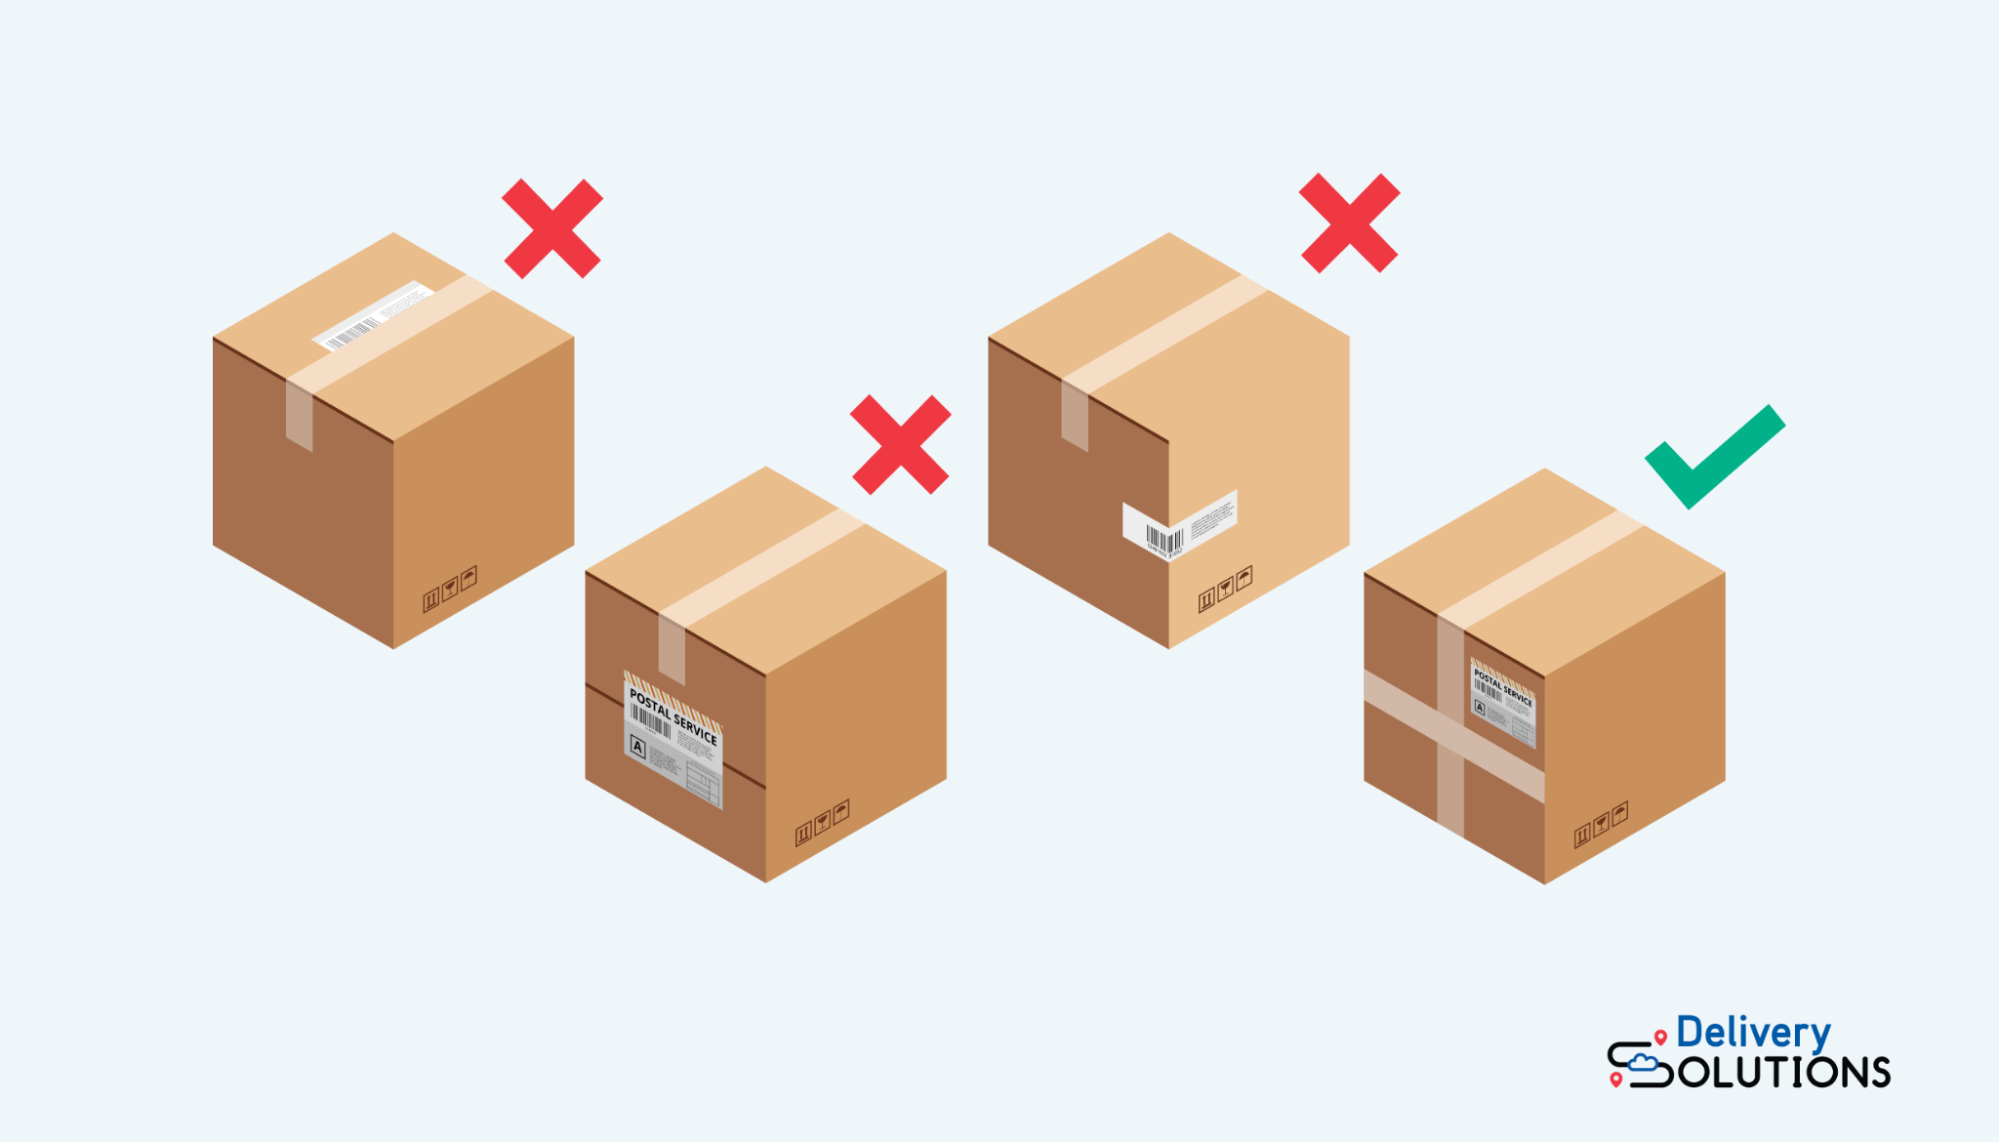 Unclear or inaccurate shipping labels